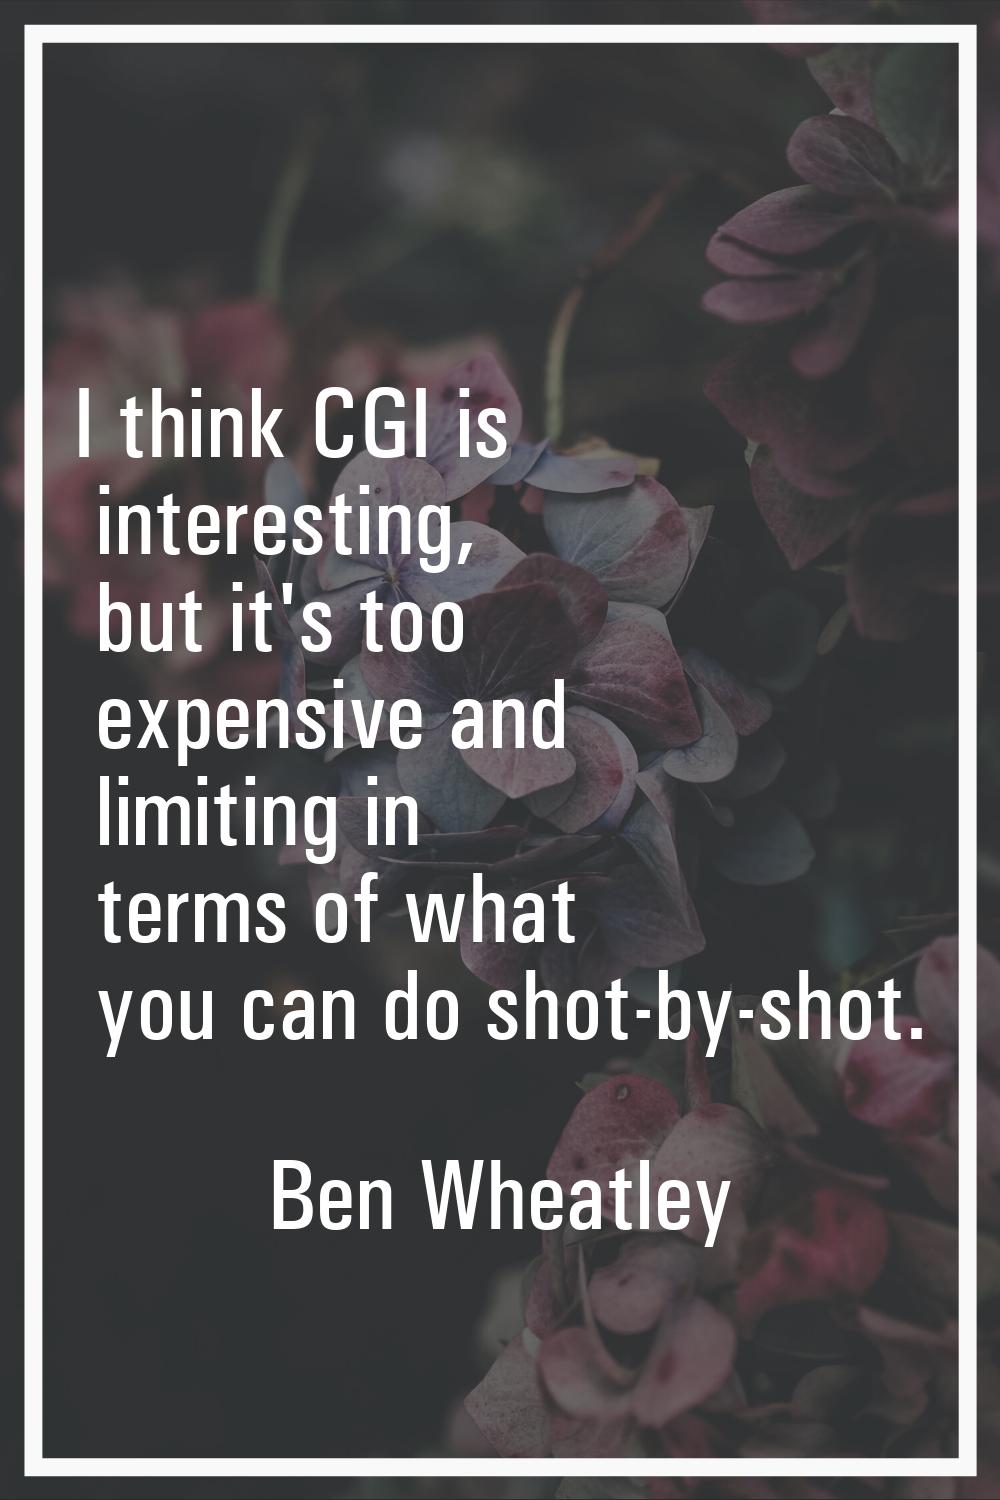 I think CGI is interesting, but it's too expensive and limiting in terms of what you can do shot-by